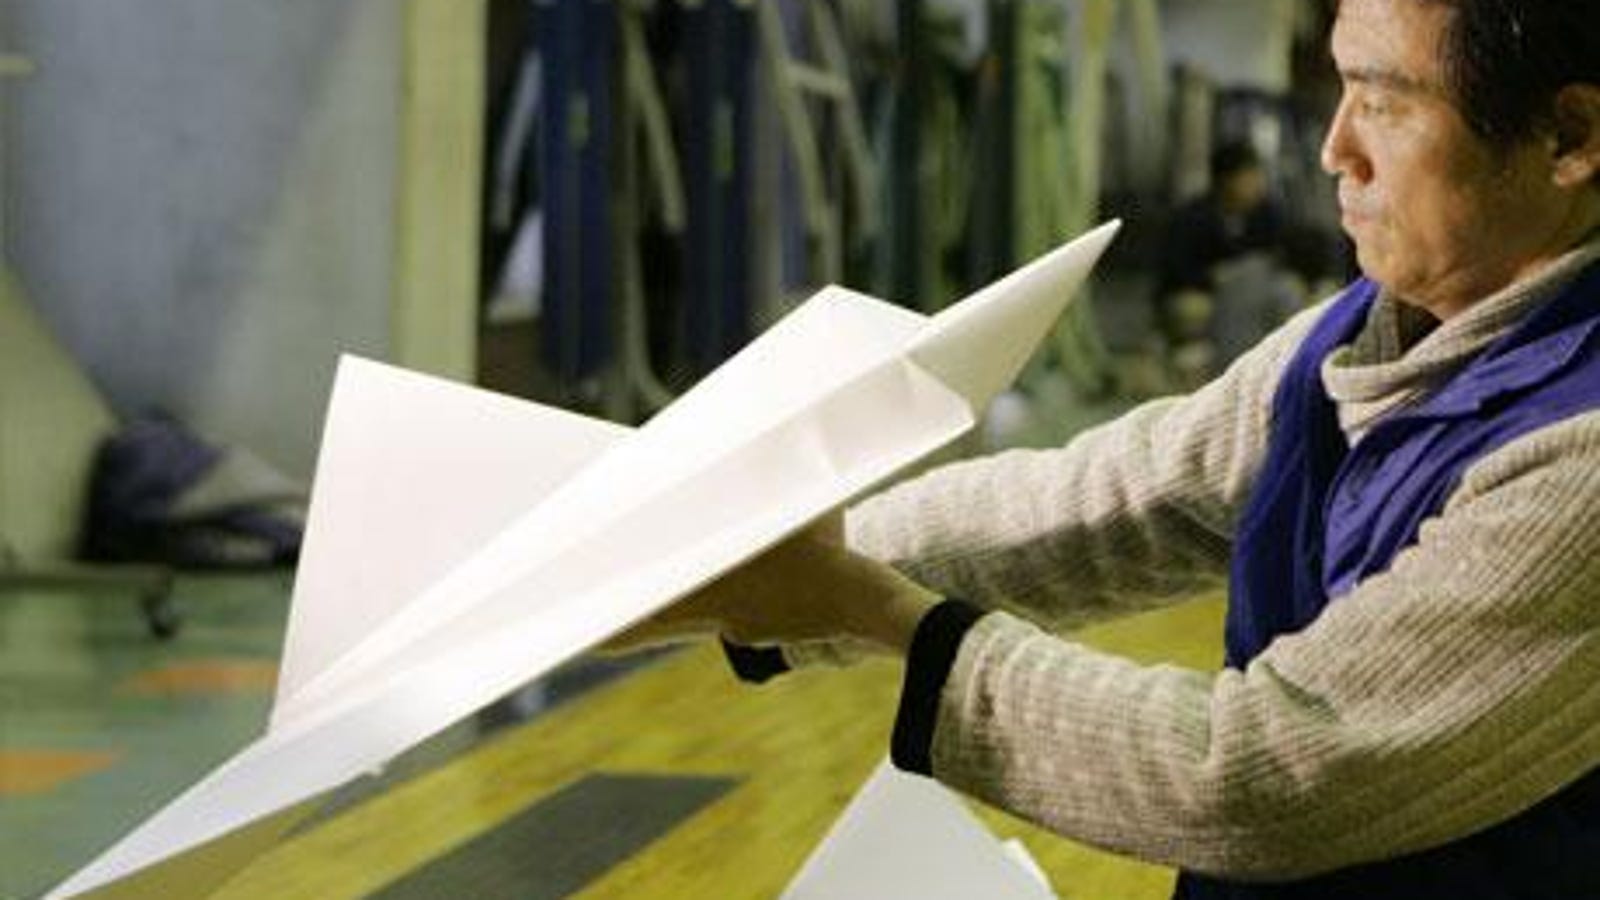 Japanese "Origami Airplane" Enthusiast Breaks World Record for Longest